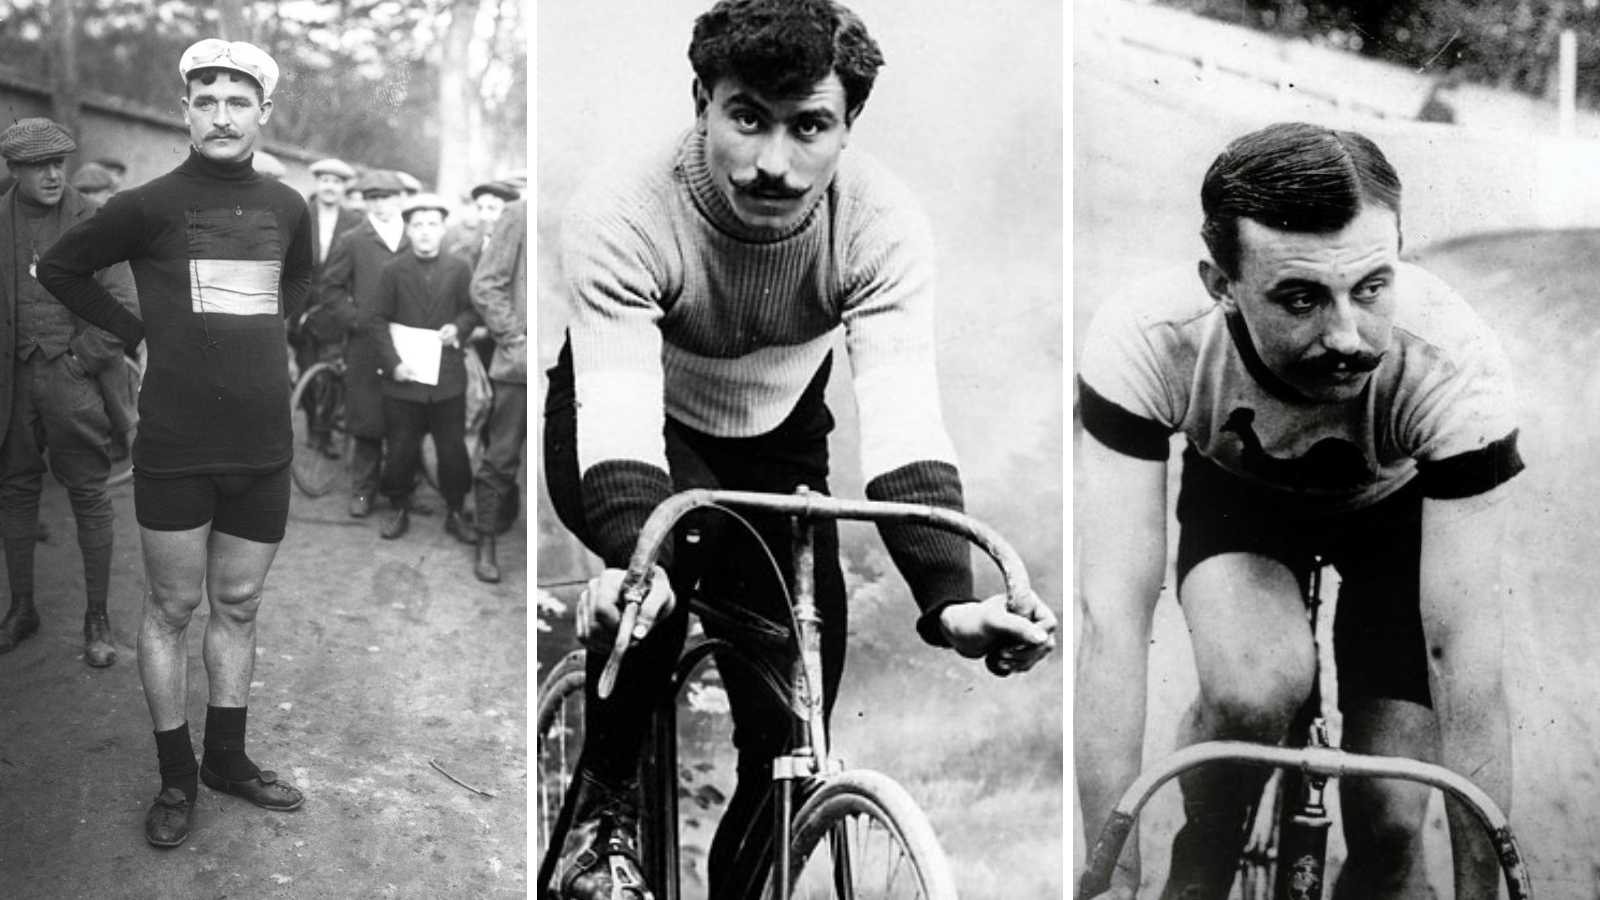 Francoise Faber, Octave Lapize, Lucien Petit-Breton, Tour de France winners, who lost their life in the First World War